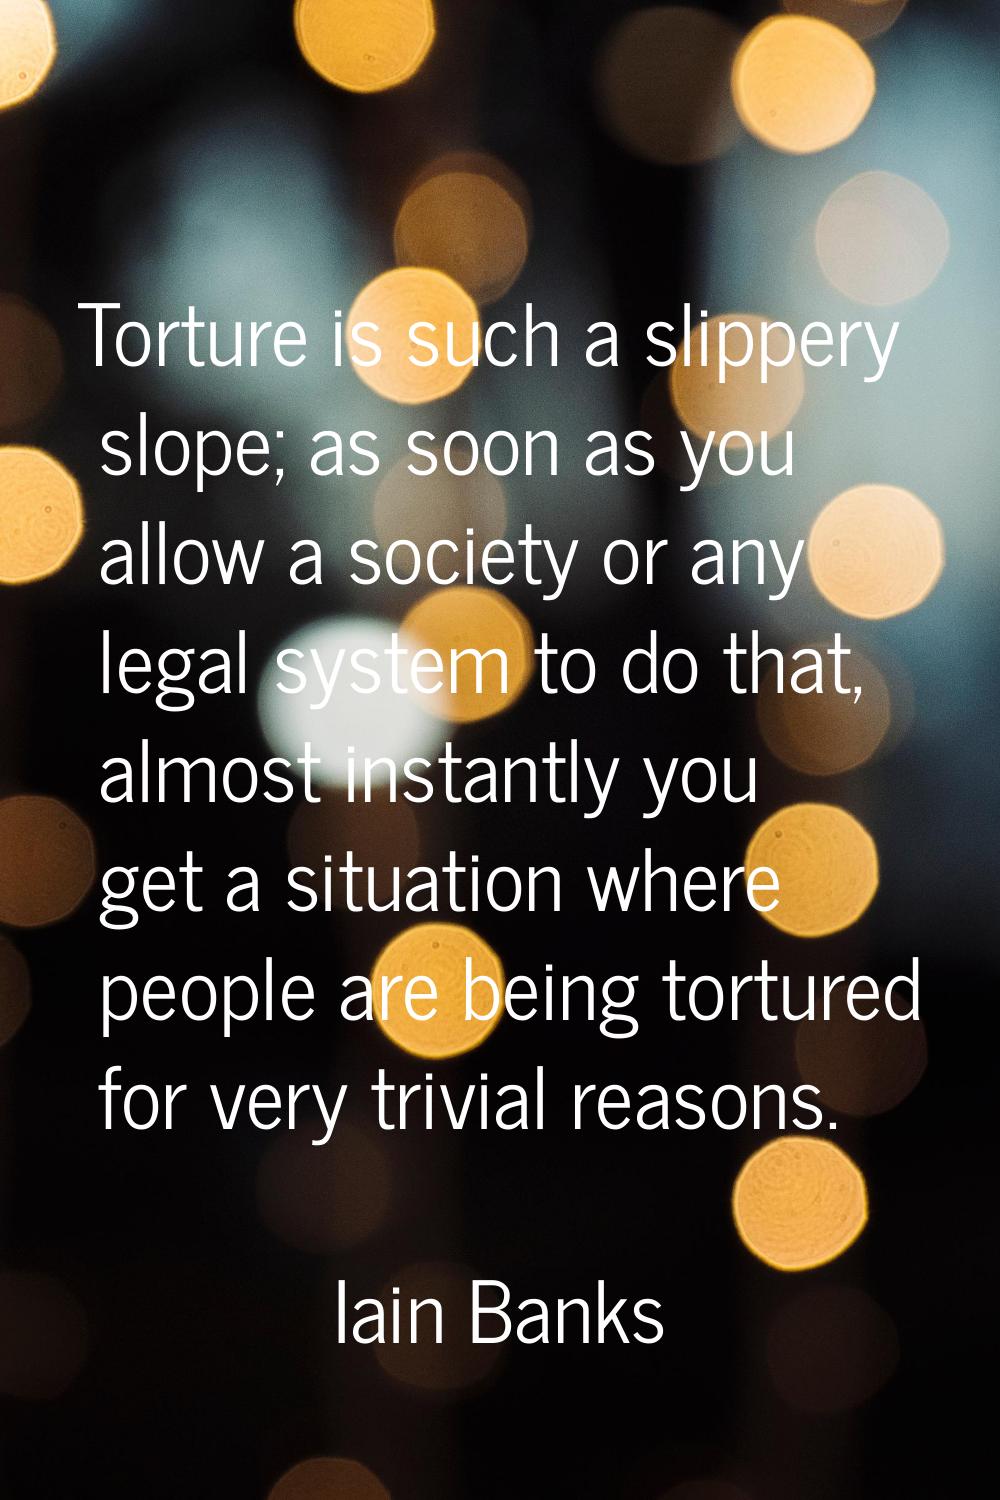 Torture is such a slippery slope; as soon as you allow a society or any legal system to do that, al